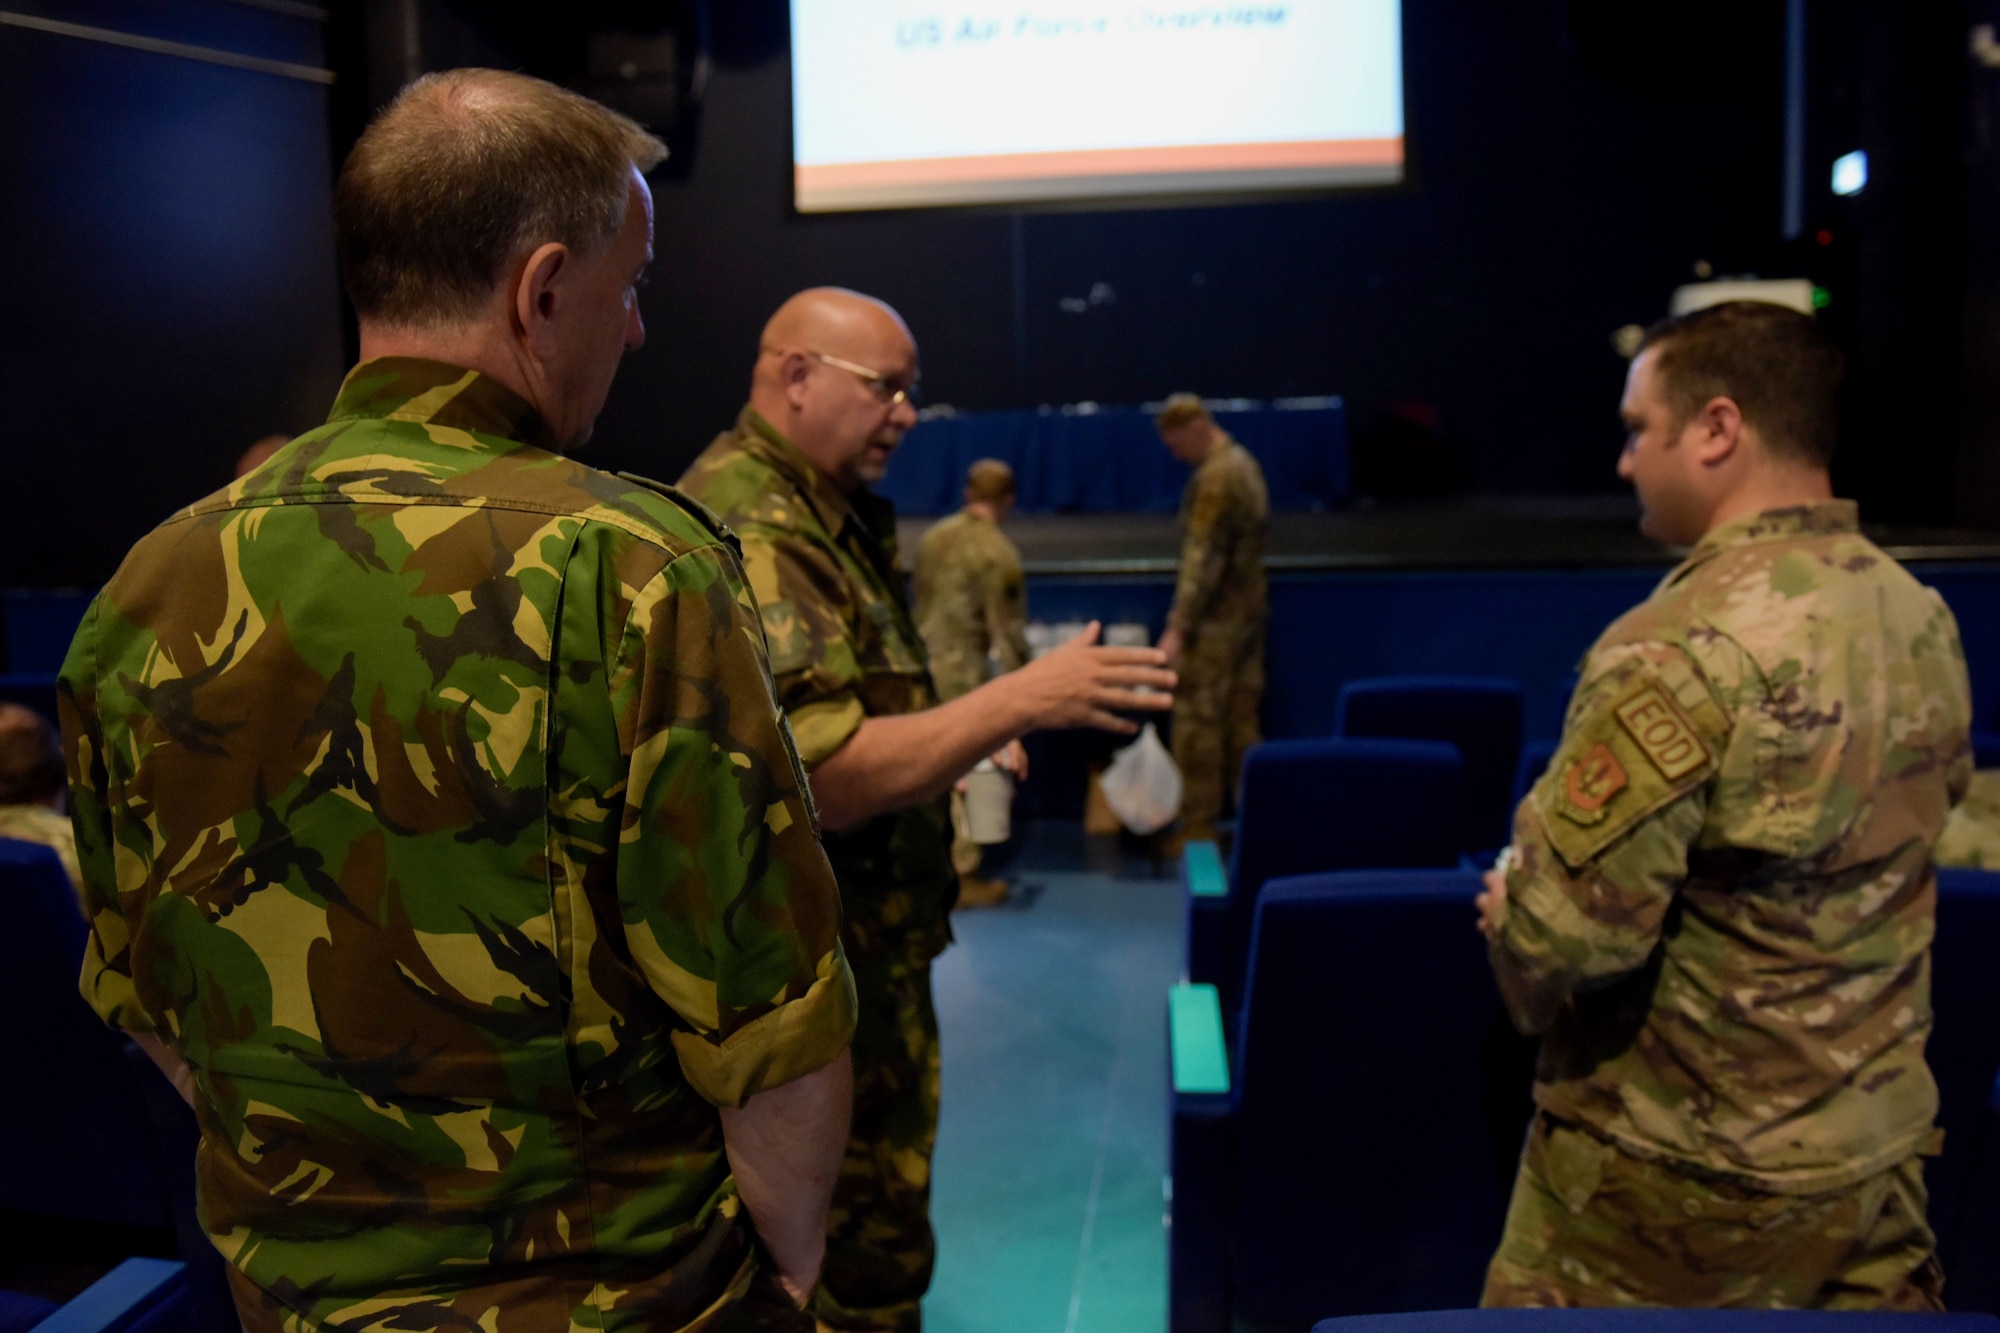 Airmen and Dutch service members discuss topics relating to EOD